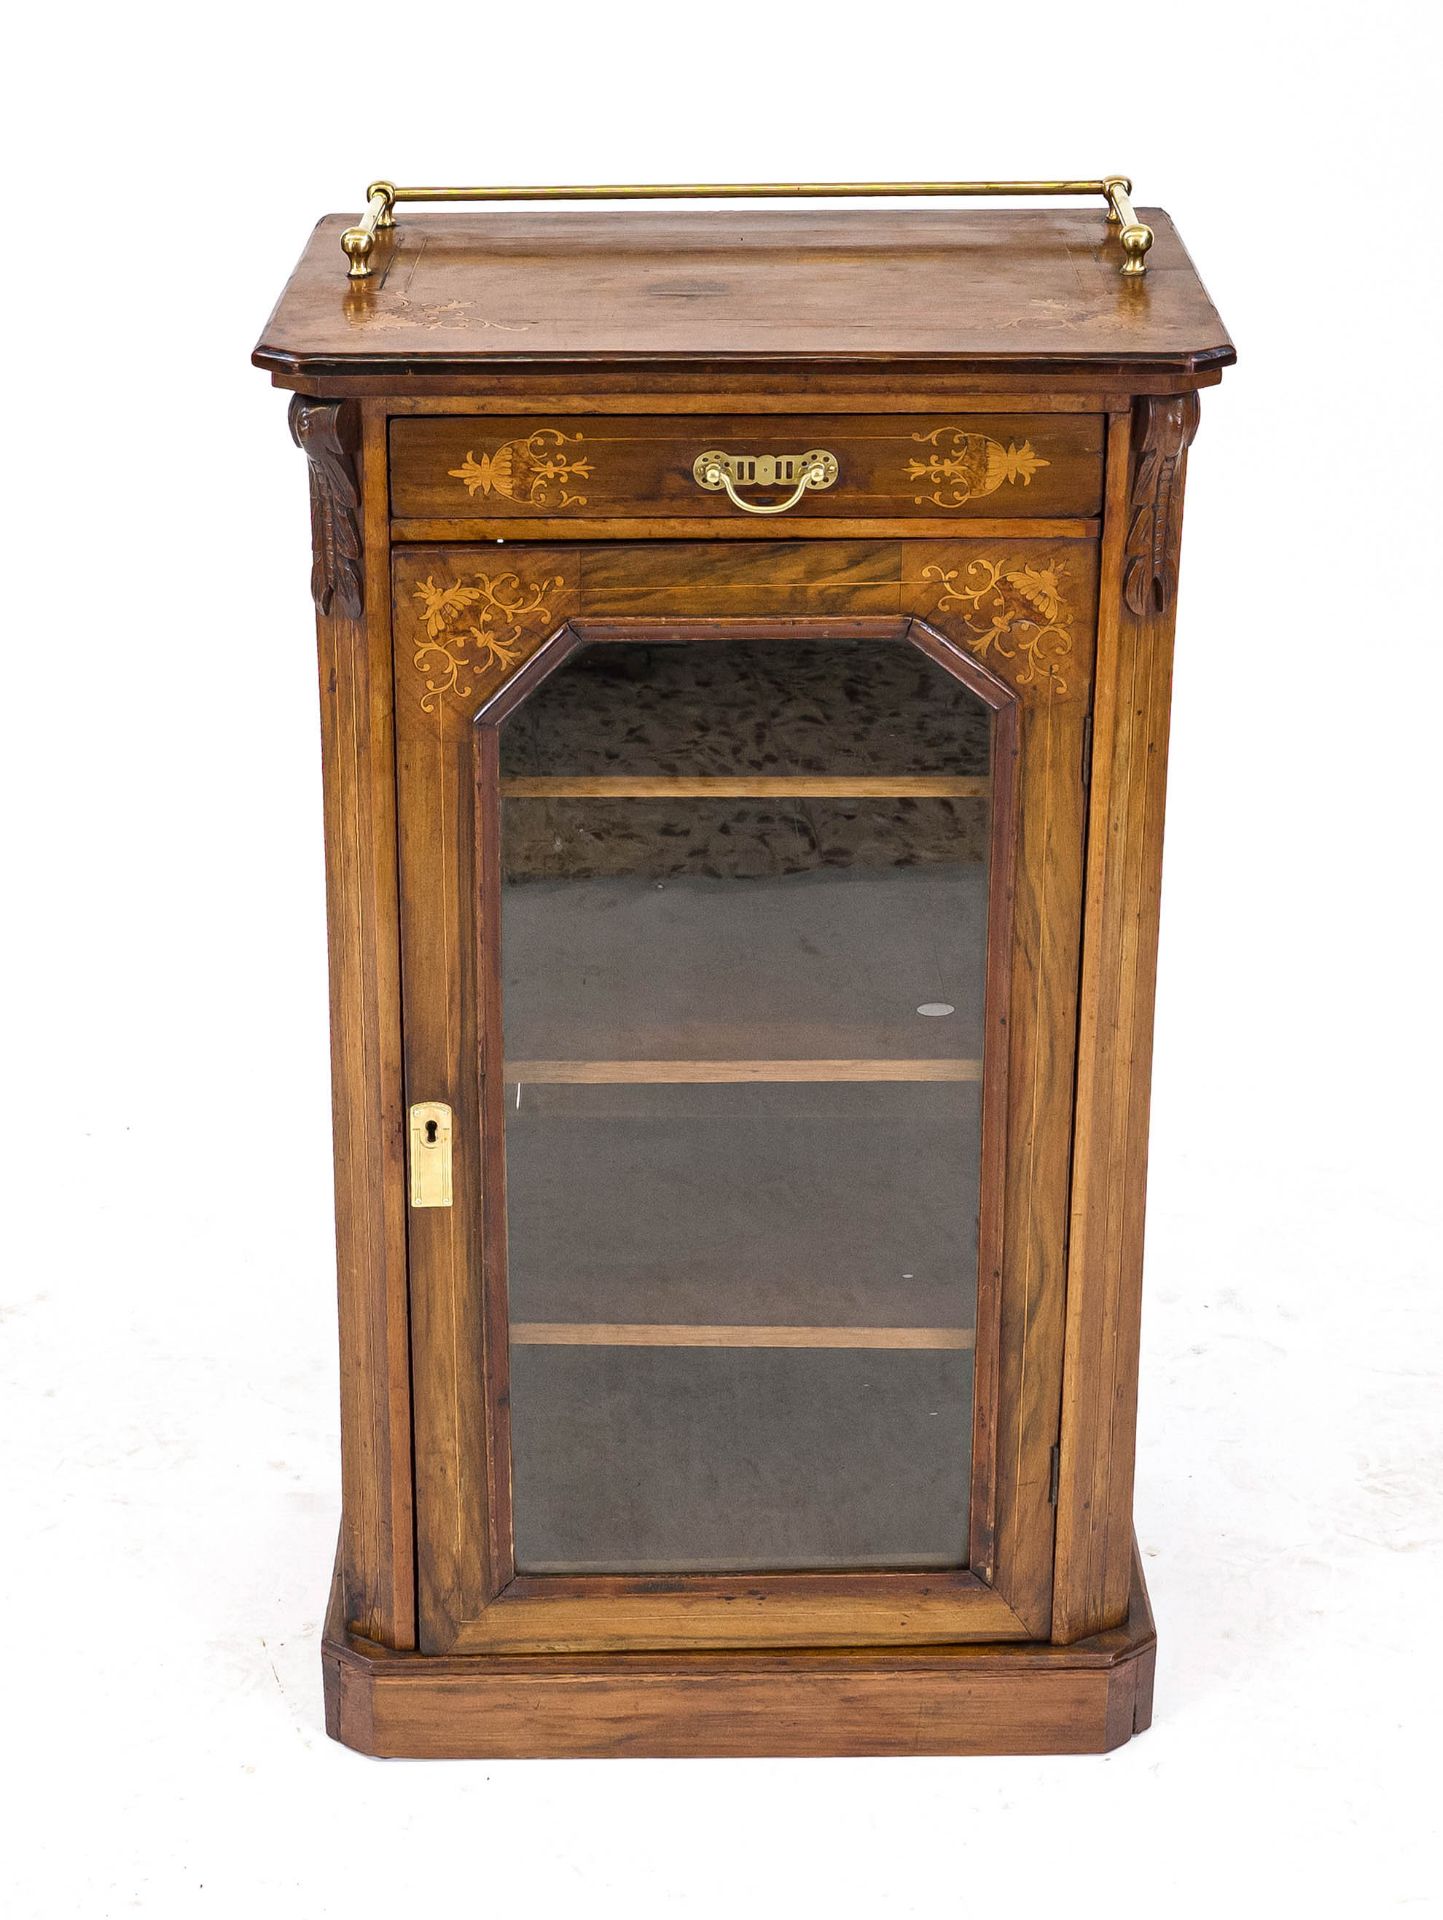 Small display cabinet, 19th century, walnut with floral inlays, 1-door glazed body, above brass rods